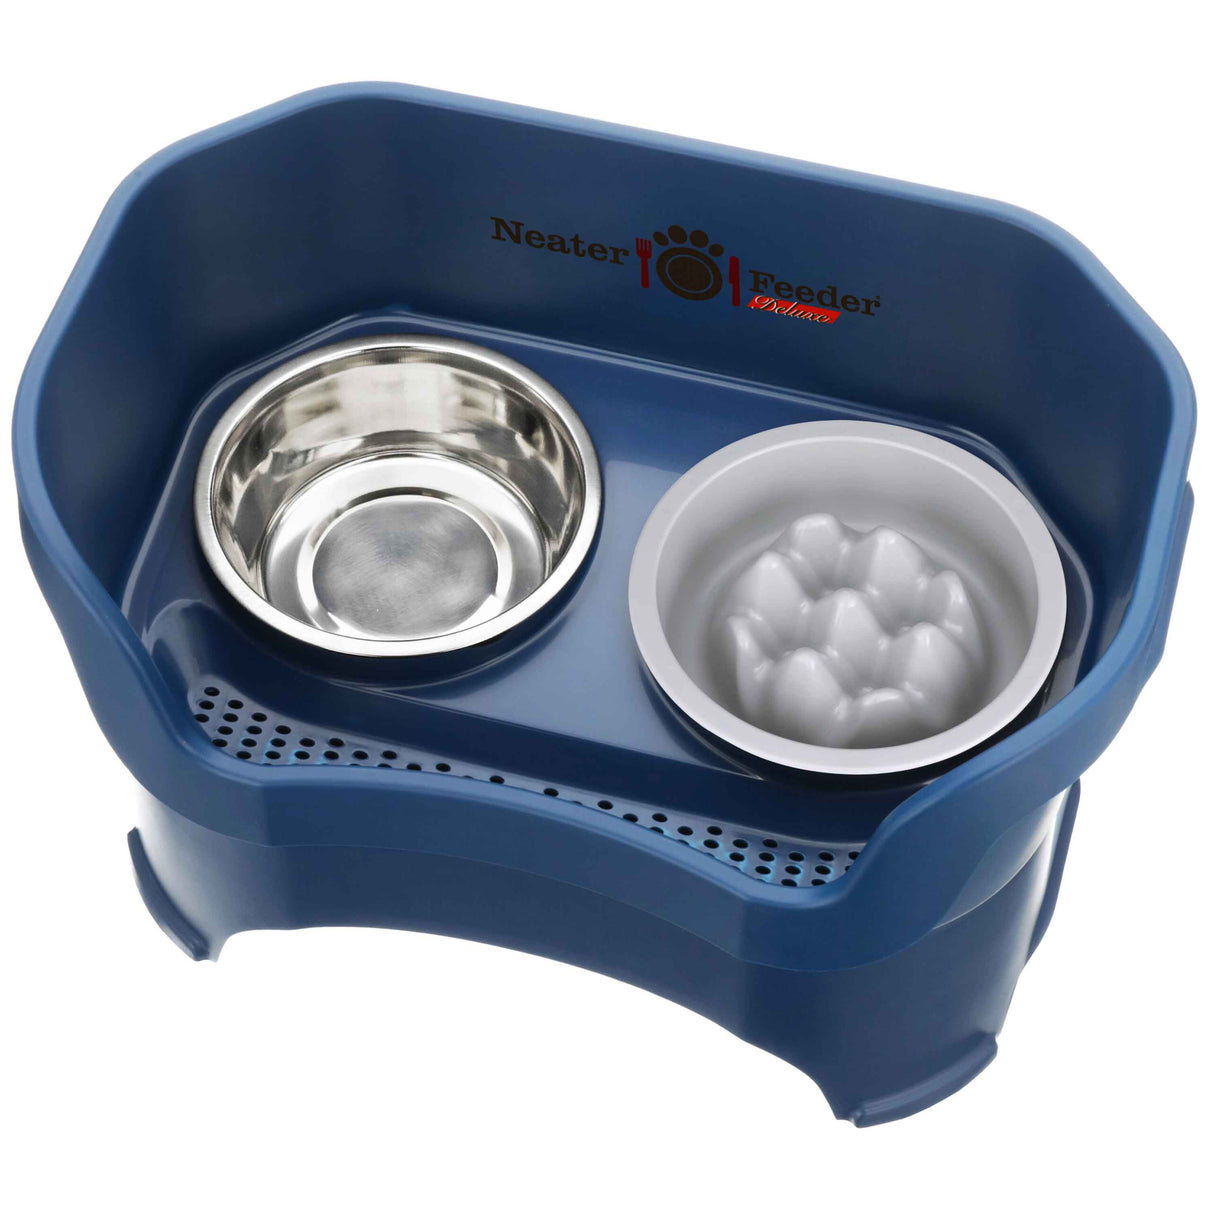 DELUXE Neater Feeder with The Niner Slow Feed Bowl – Neater Pets